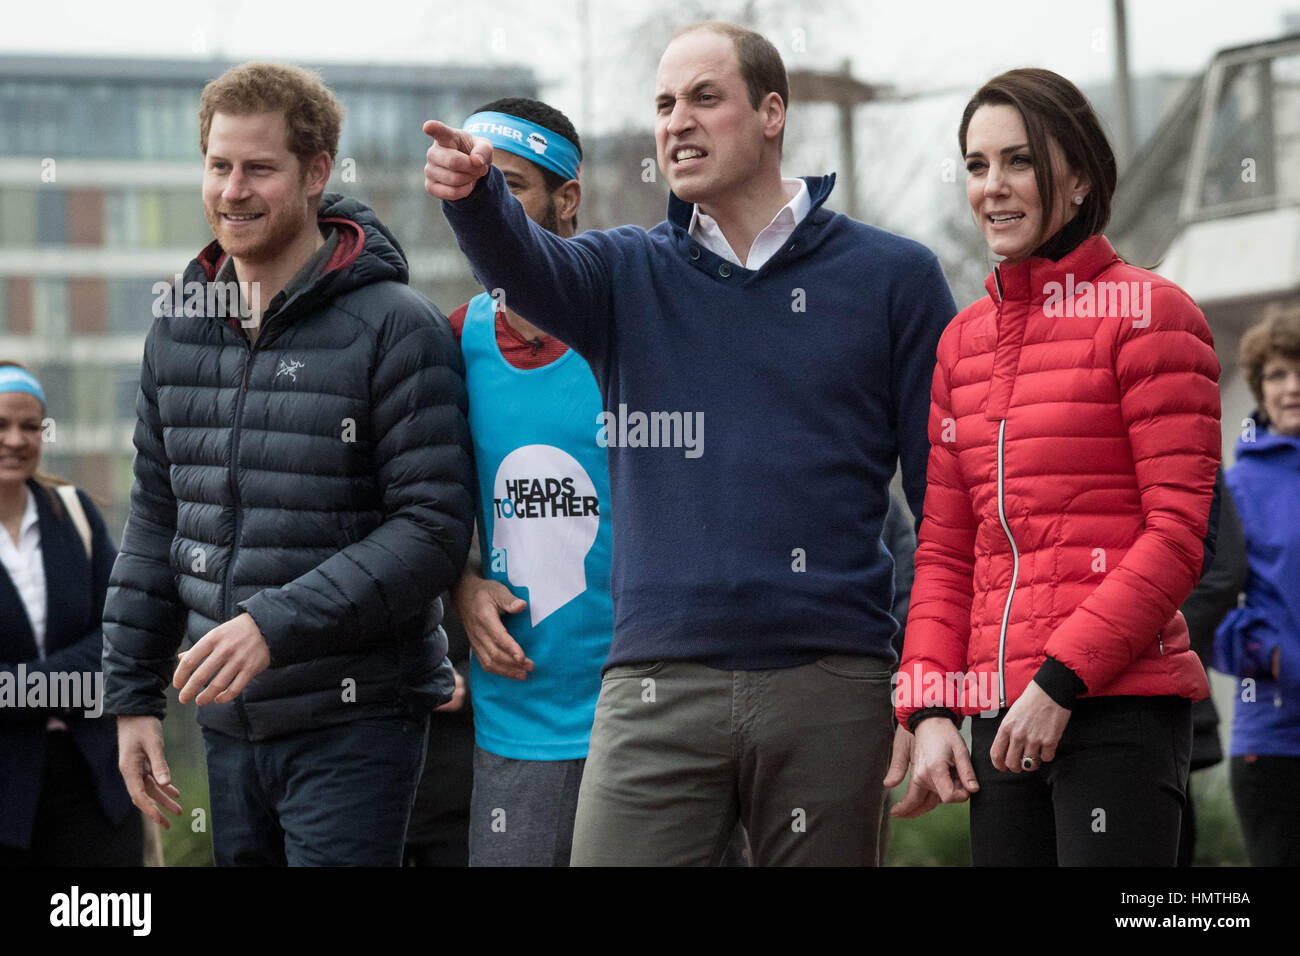 London, UK. 5th February, 2017. The Duke and Duchess of Cambridge and Prince Harry join a training day at the Queen Elizabeth Olympic Park with the runners taking part in the 2017 London Marathon for Heads Together, the official charity of the year. © Guy Corbishley/Alamy Live News Stock Photo